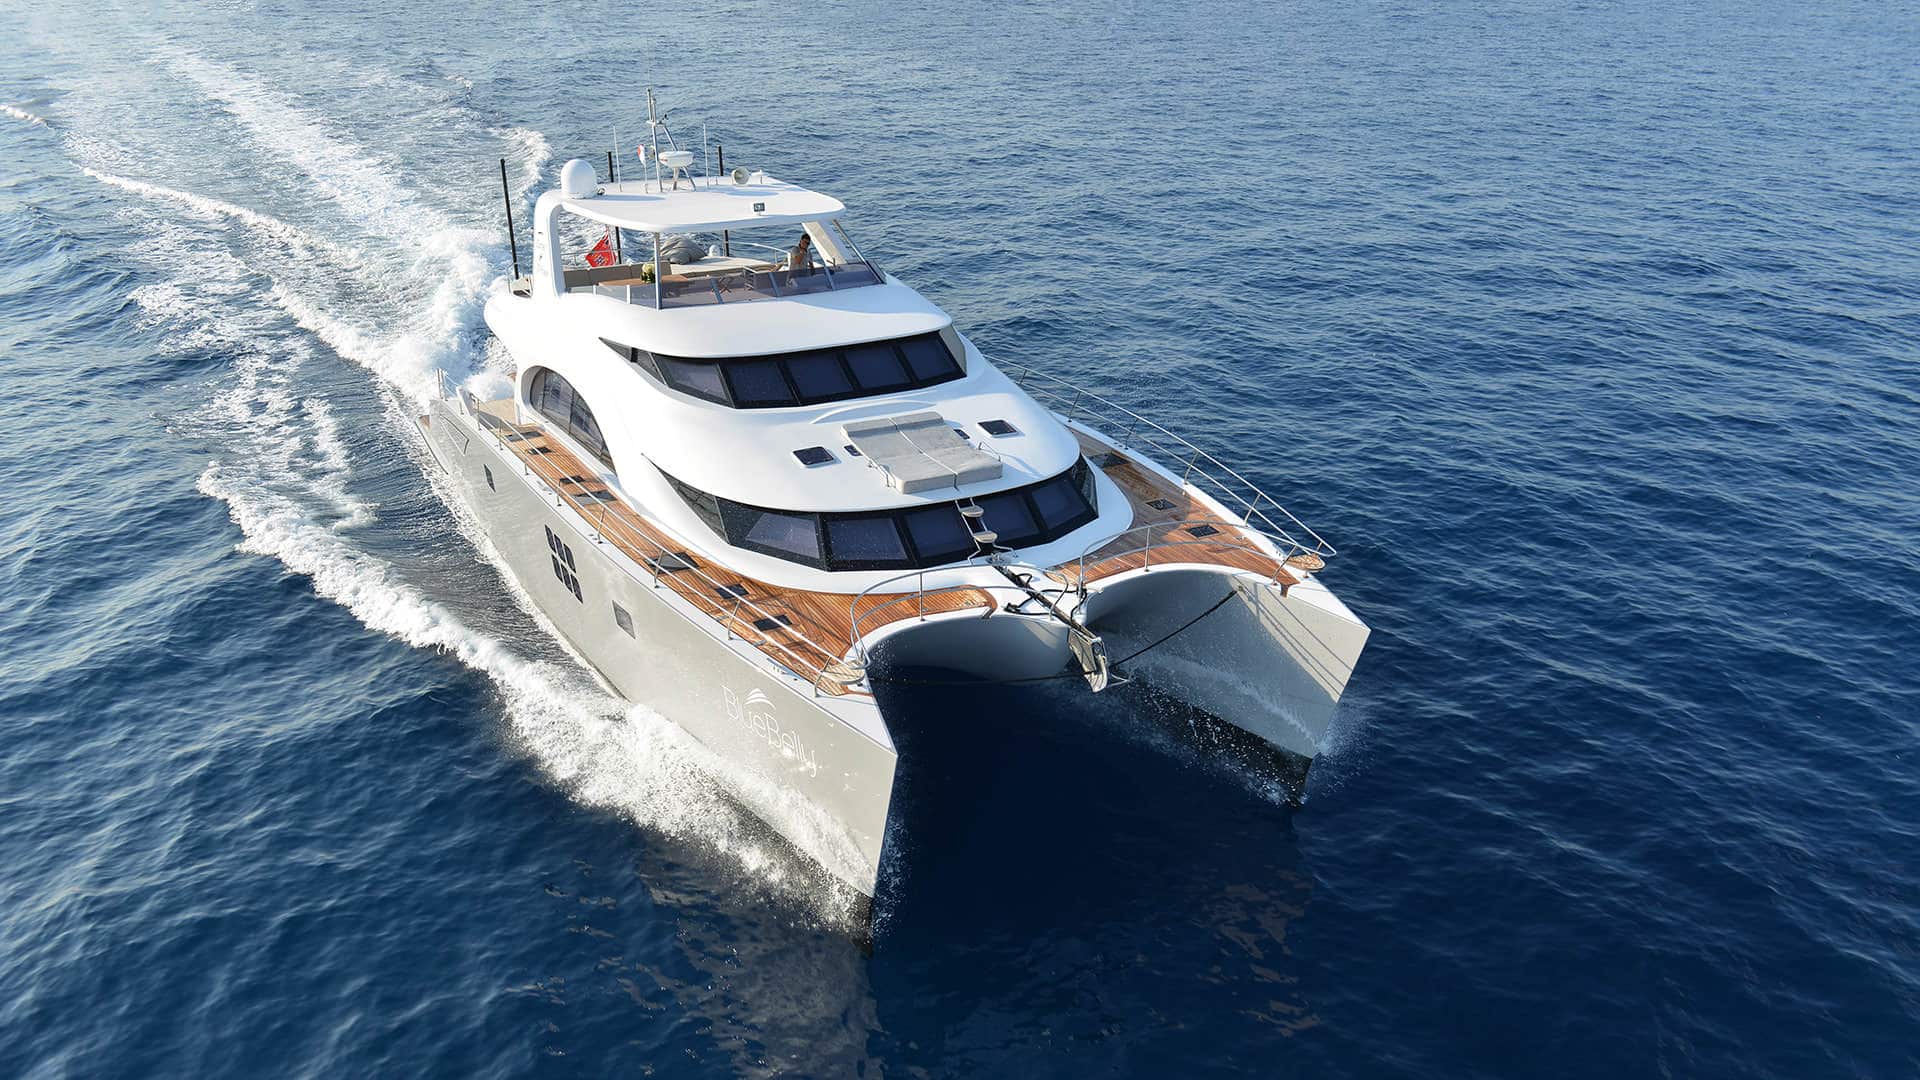 The Lap of Luxury Top 5 Most Interesting Yachts at the Miami Boat